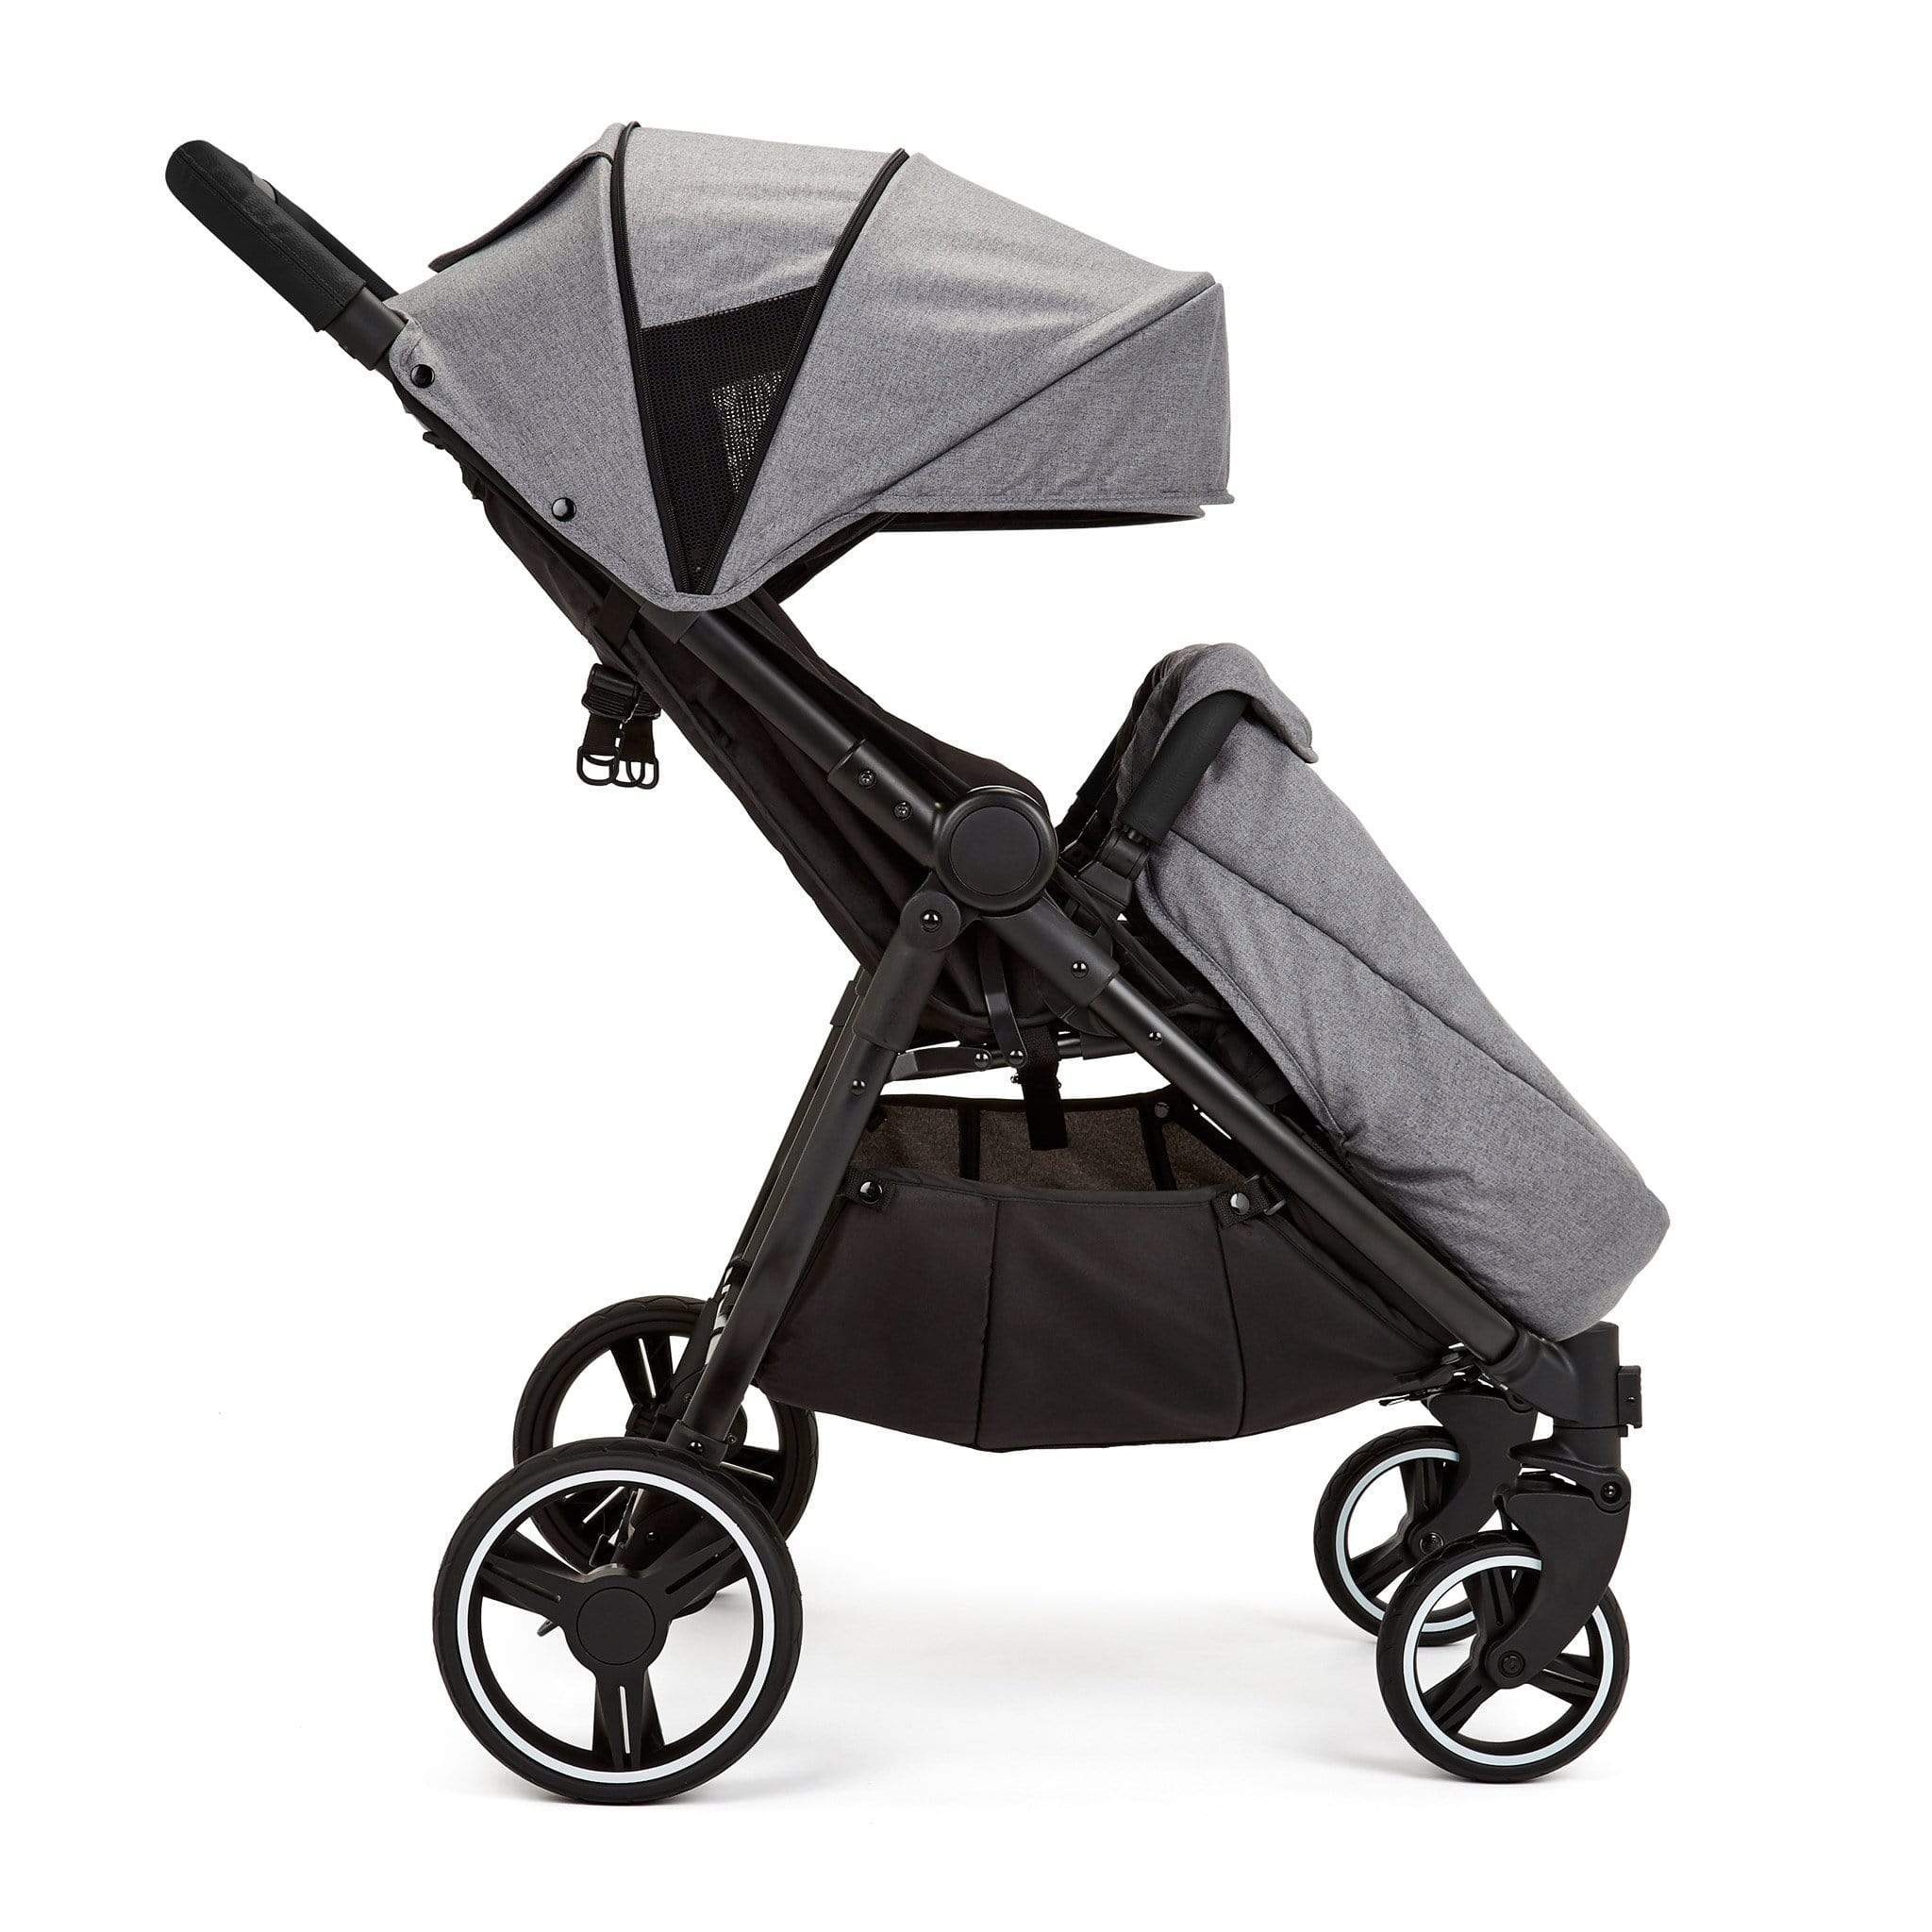 Ickle Bubba double buggies Ickle Bubba Venus Max Double Stroller Black/Space Grey/Black 16-004-200-014